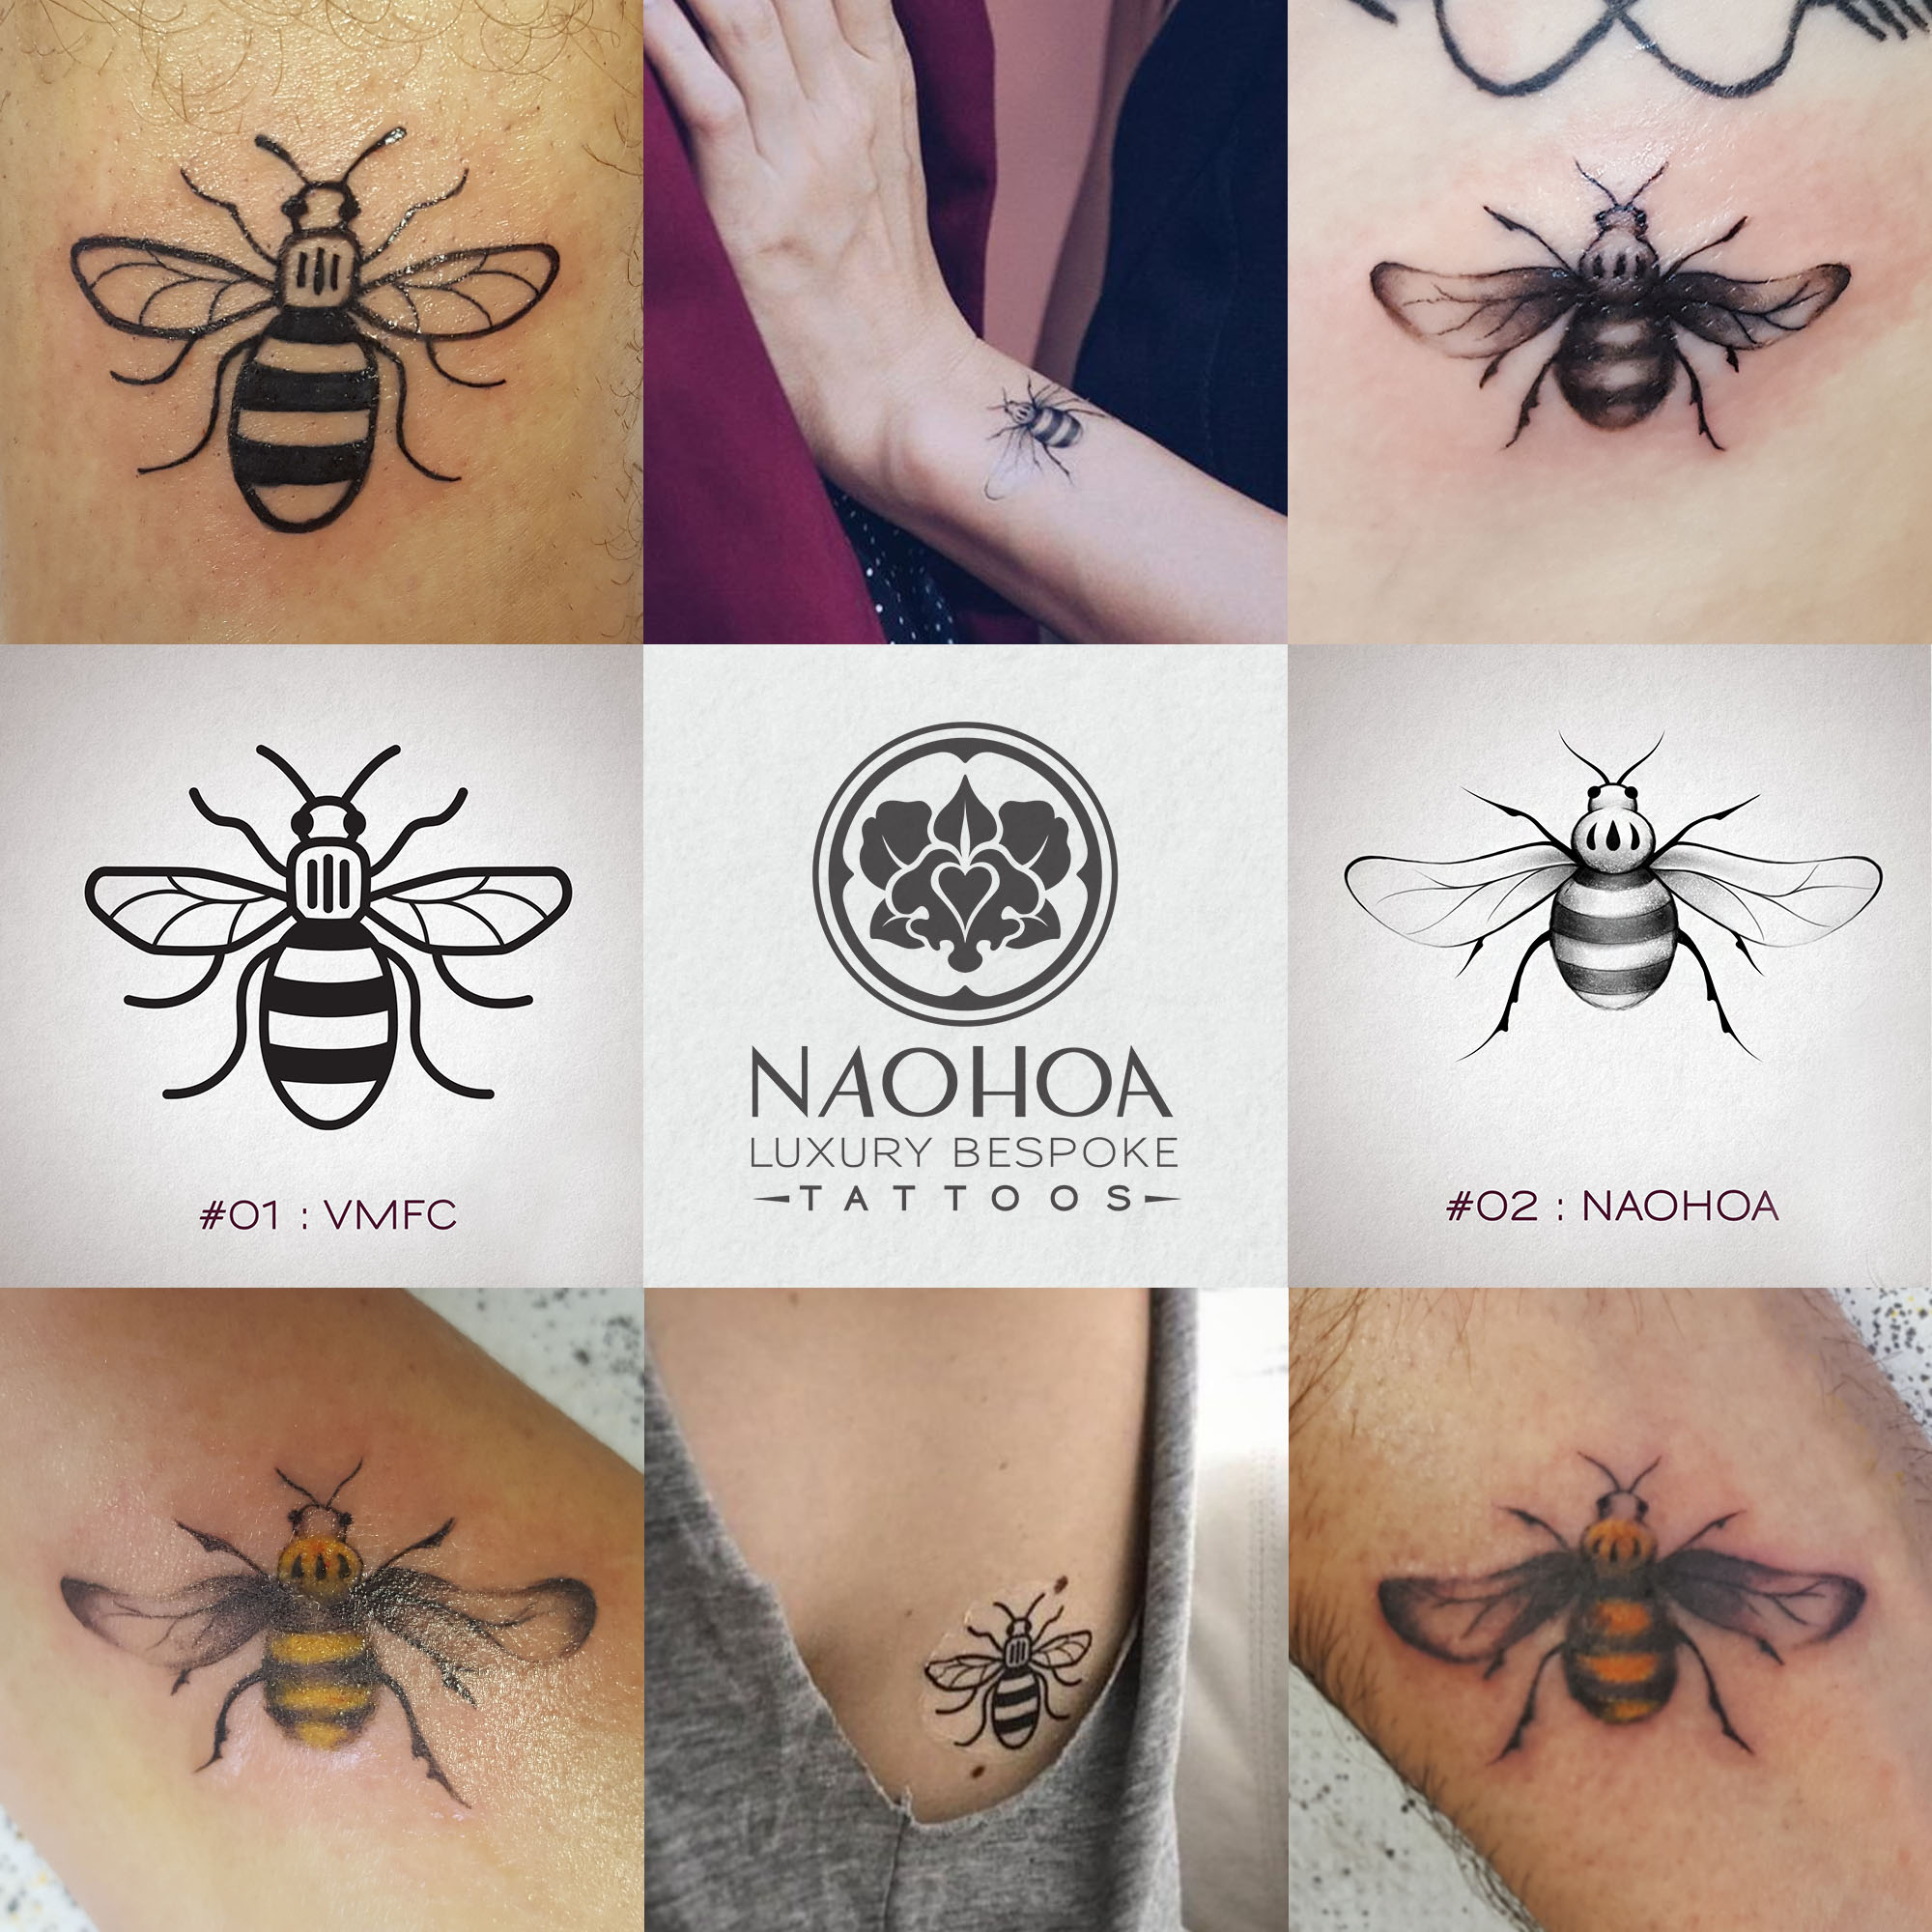 Manchester Bee tattoos in tribute to the terror attack in 2017. NAOHOA Luxury Bespoke Tattoos was the only studio in Cardiff to provide locals with Manchester Bee tattoos.